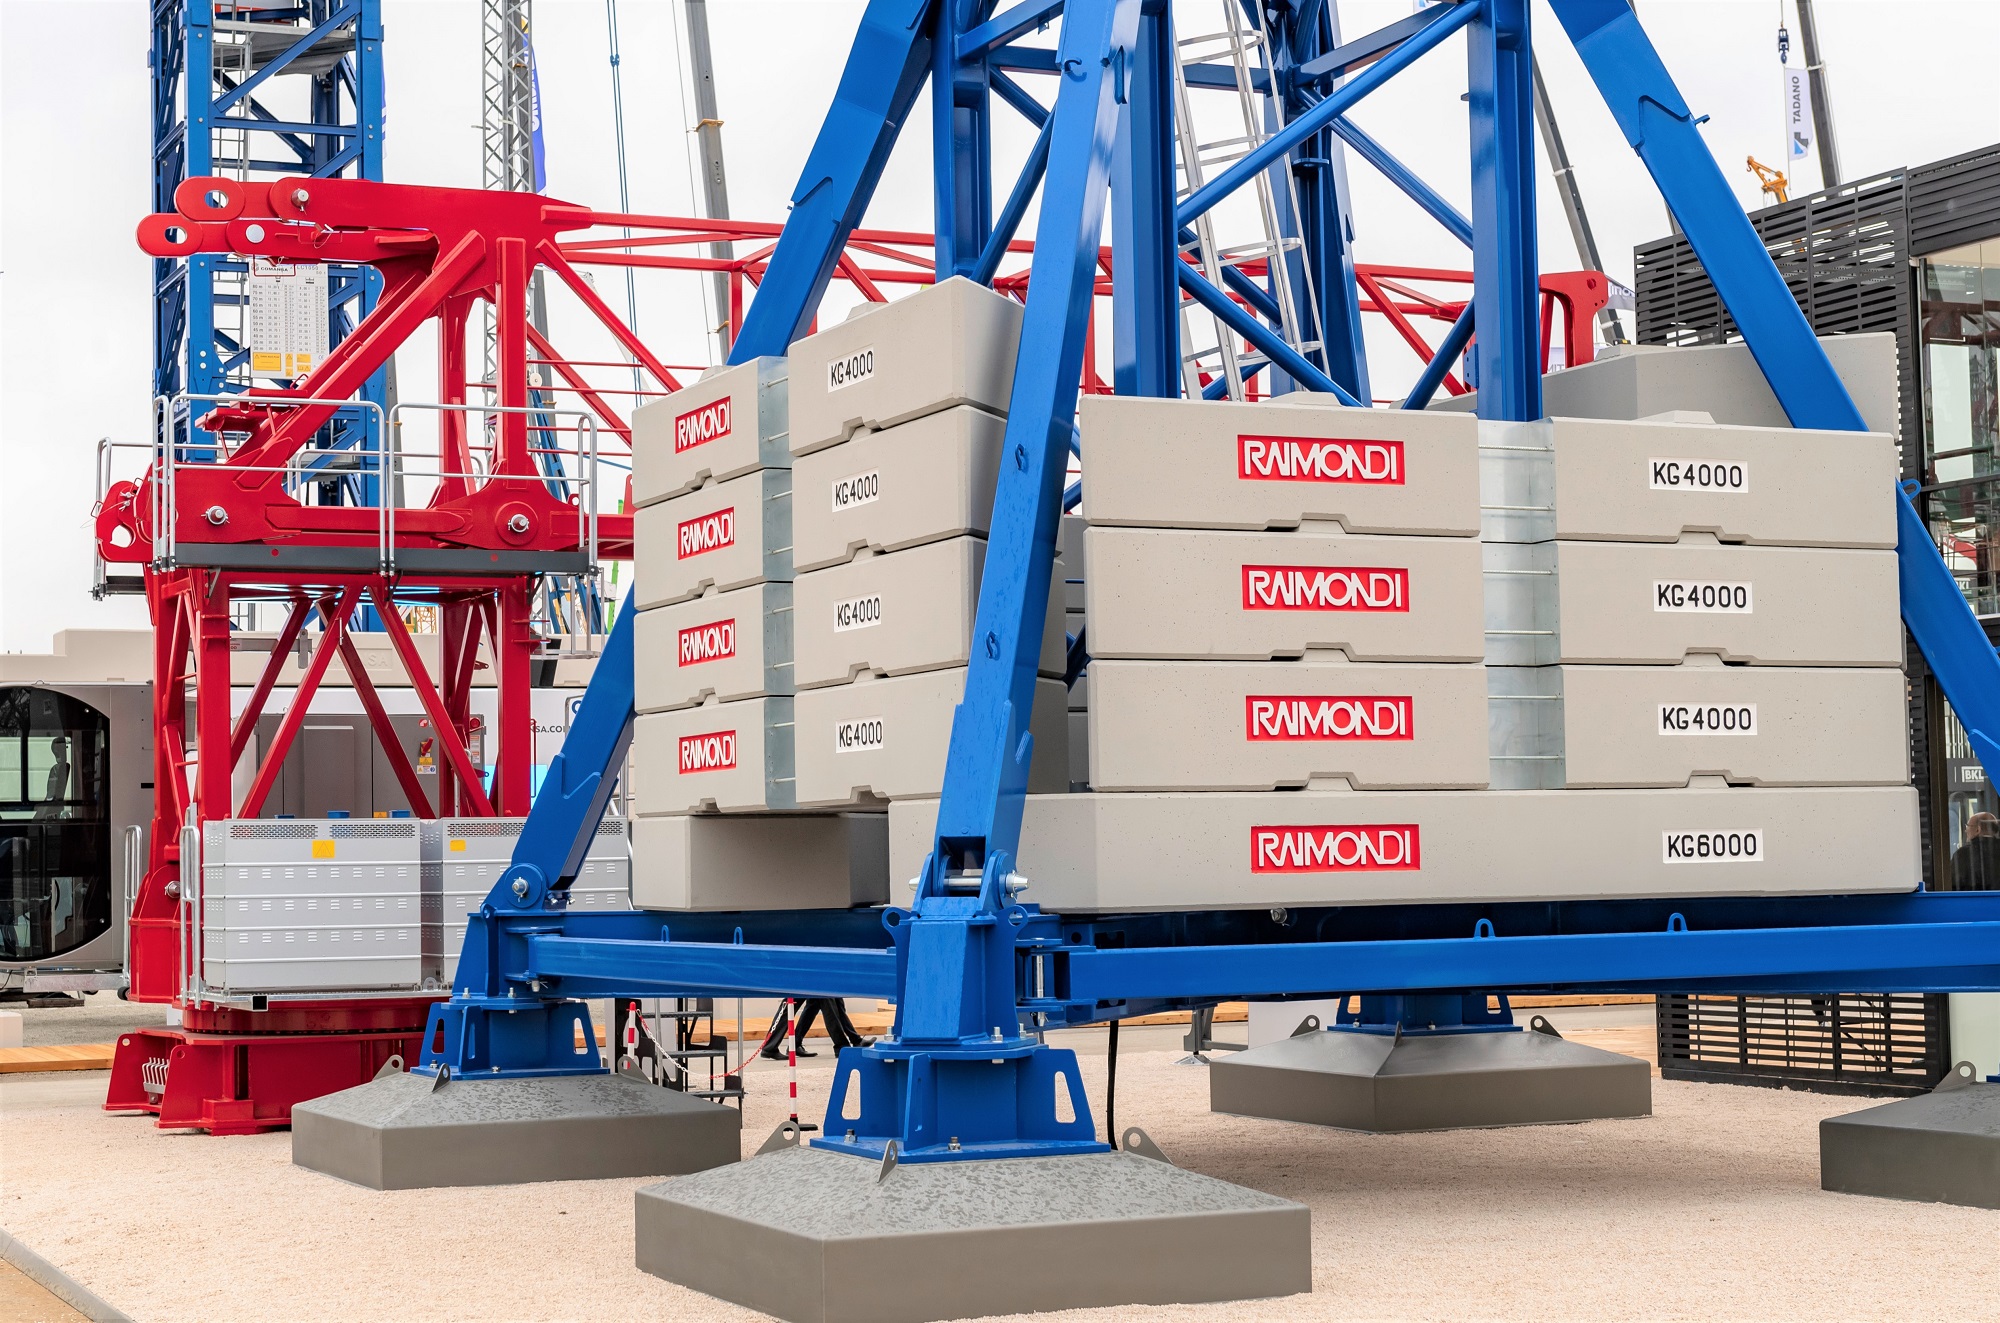 Raimondi Cranes releases the 2019 Product Guide for online download